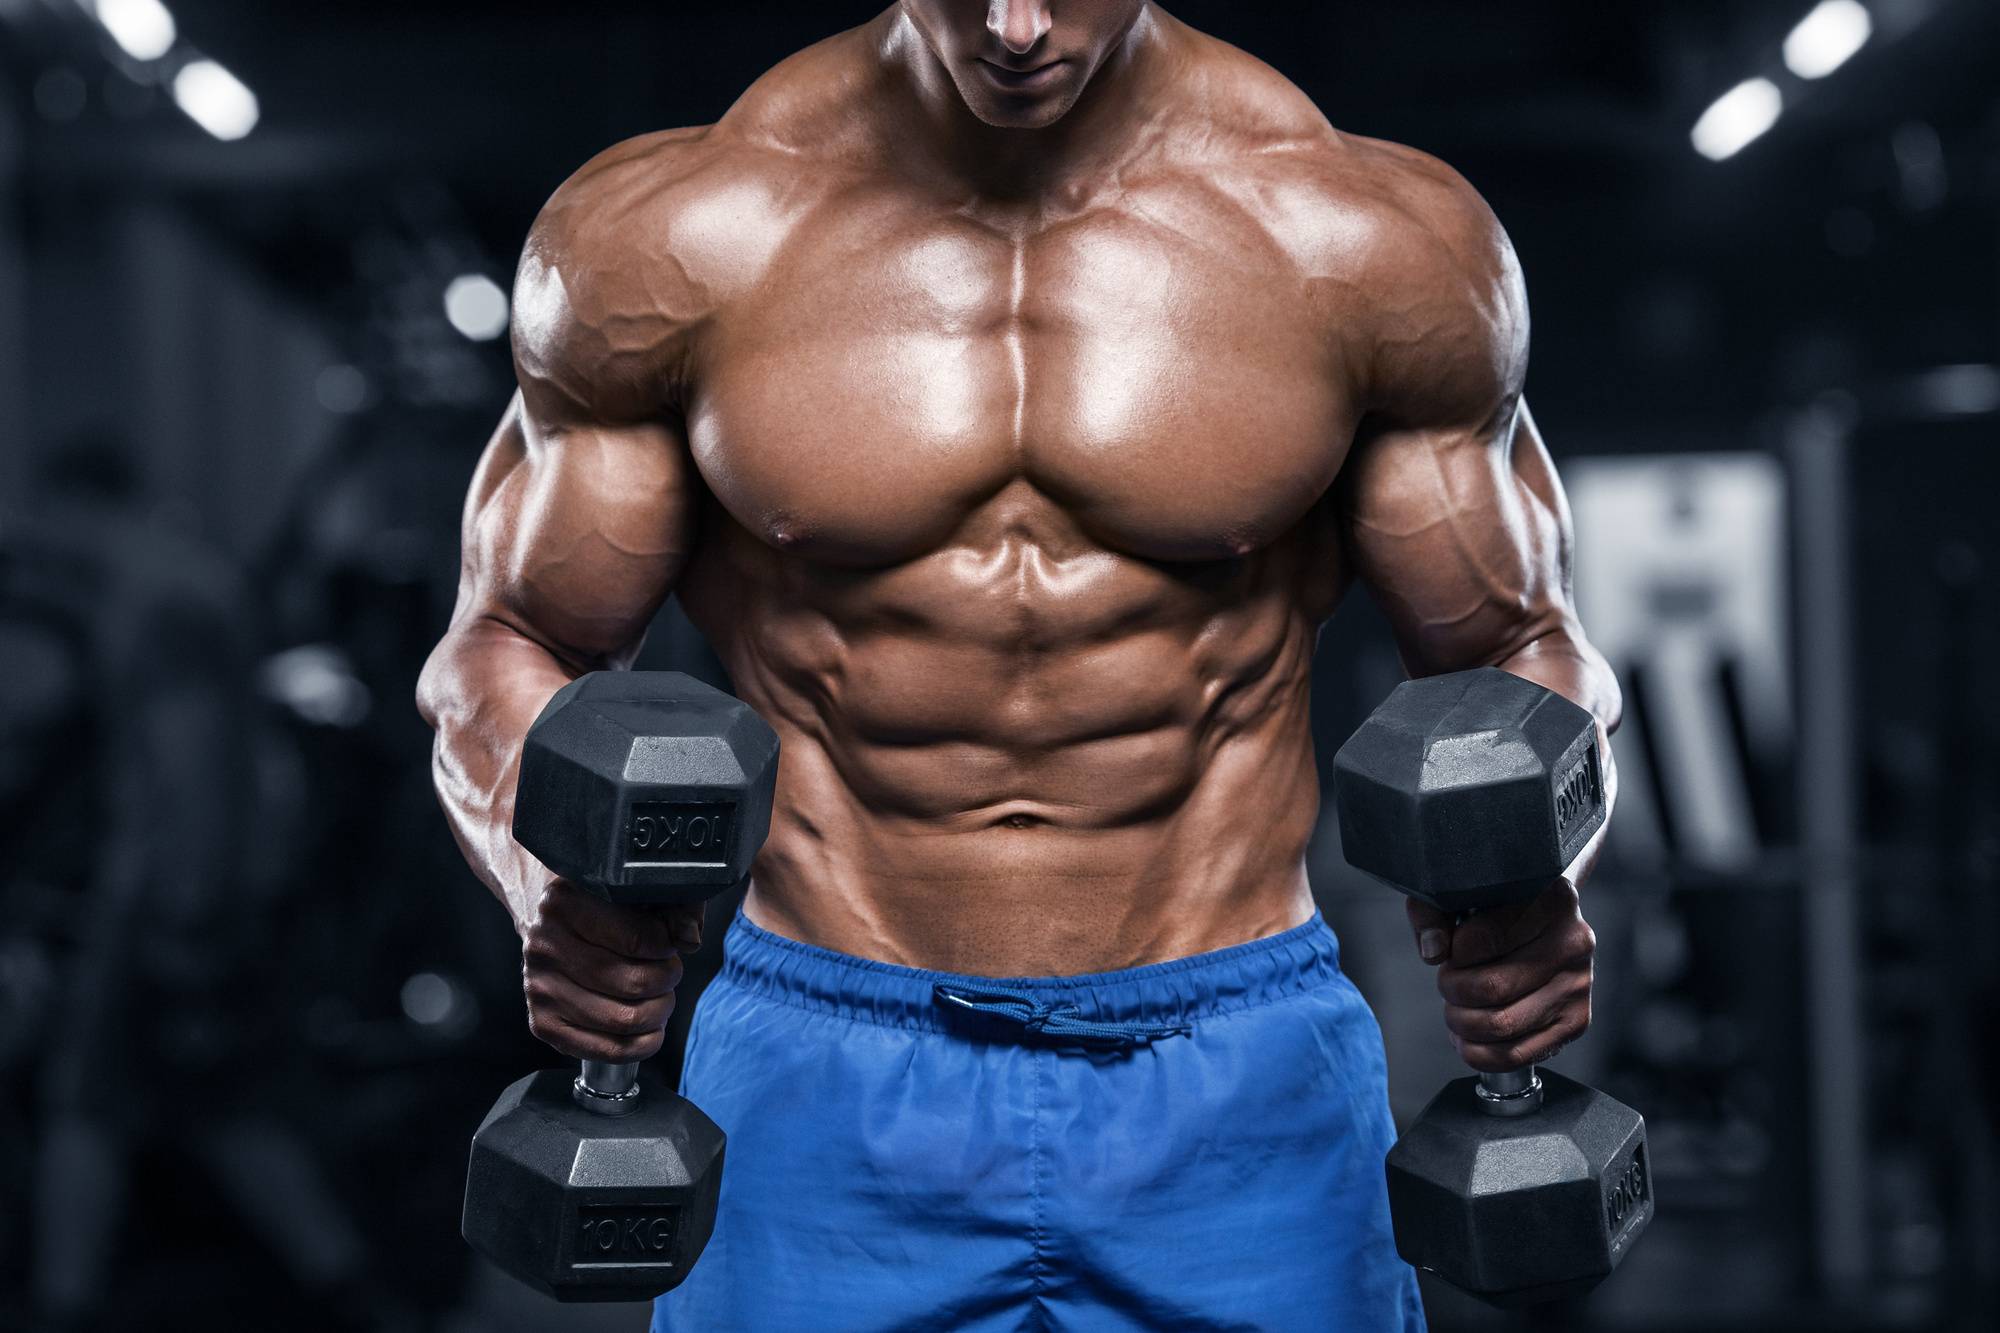 Building muscle Mass